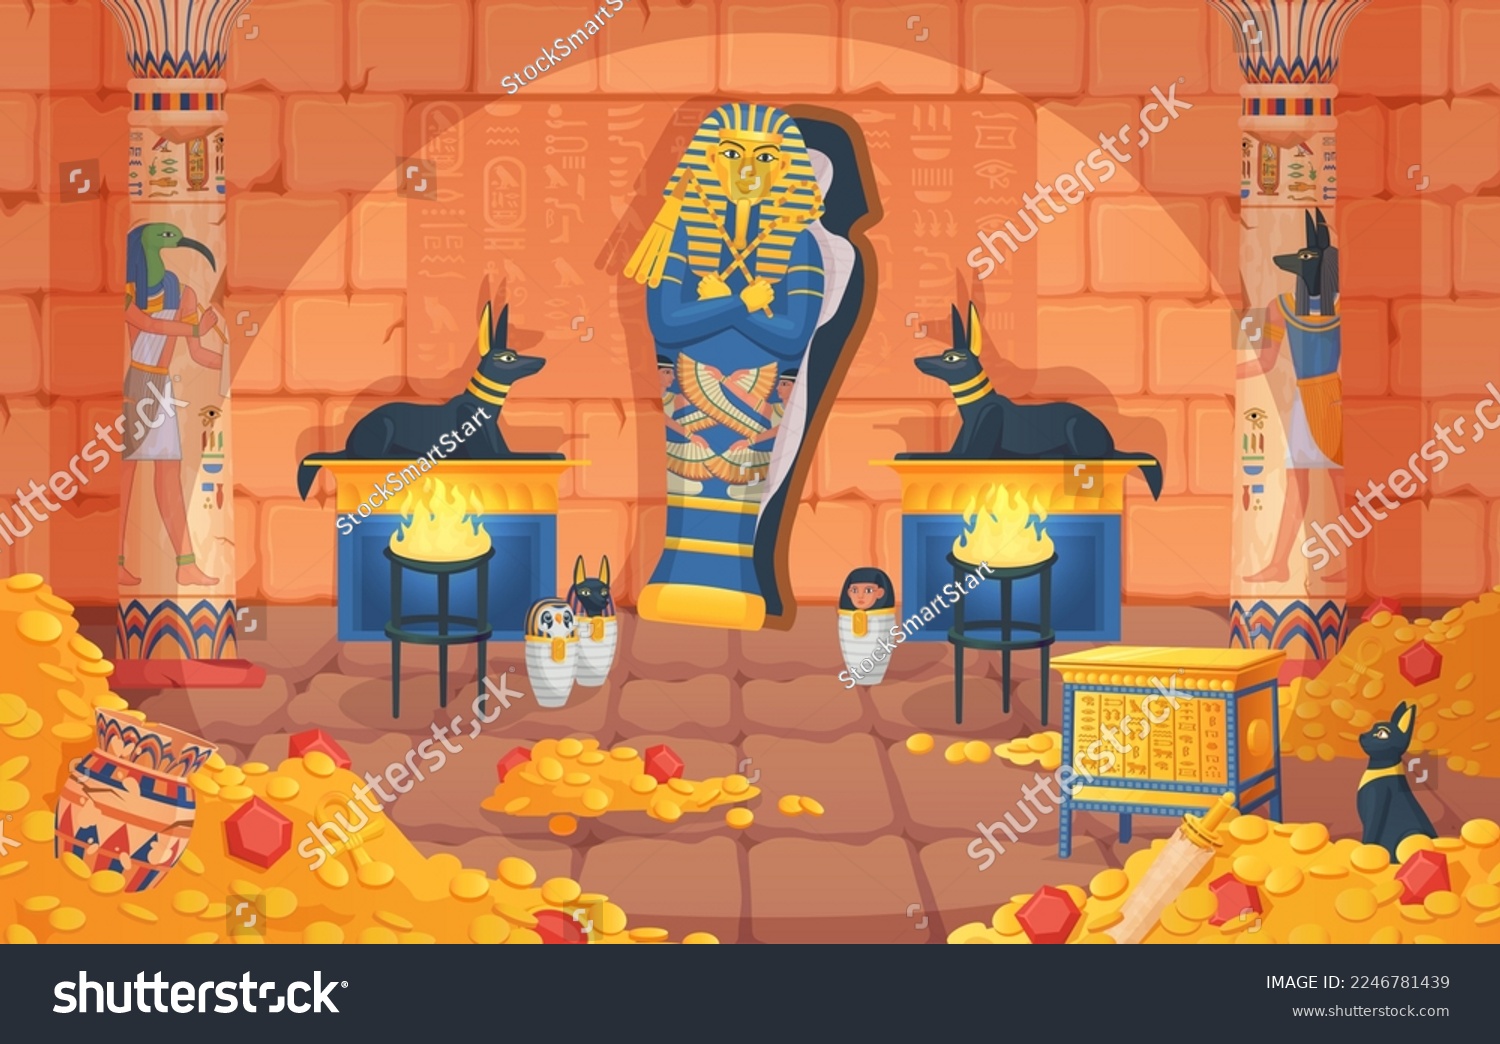 SVG of Egyptian tomb. Egypt tombs, underground palace inside pyramid, pharaoh sarcophagus afterlife coffin, gold treasure chamber game background ingenious vector illustration of egyptian tomb civilization svg